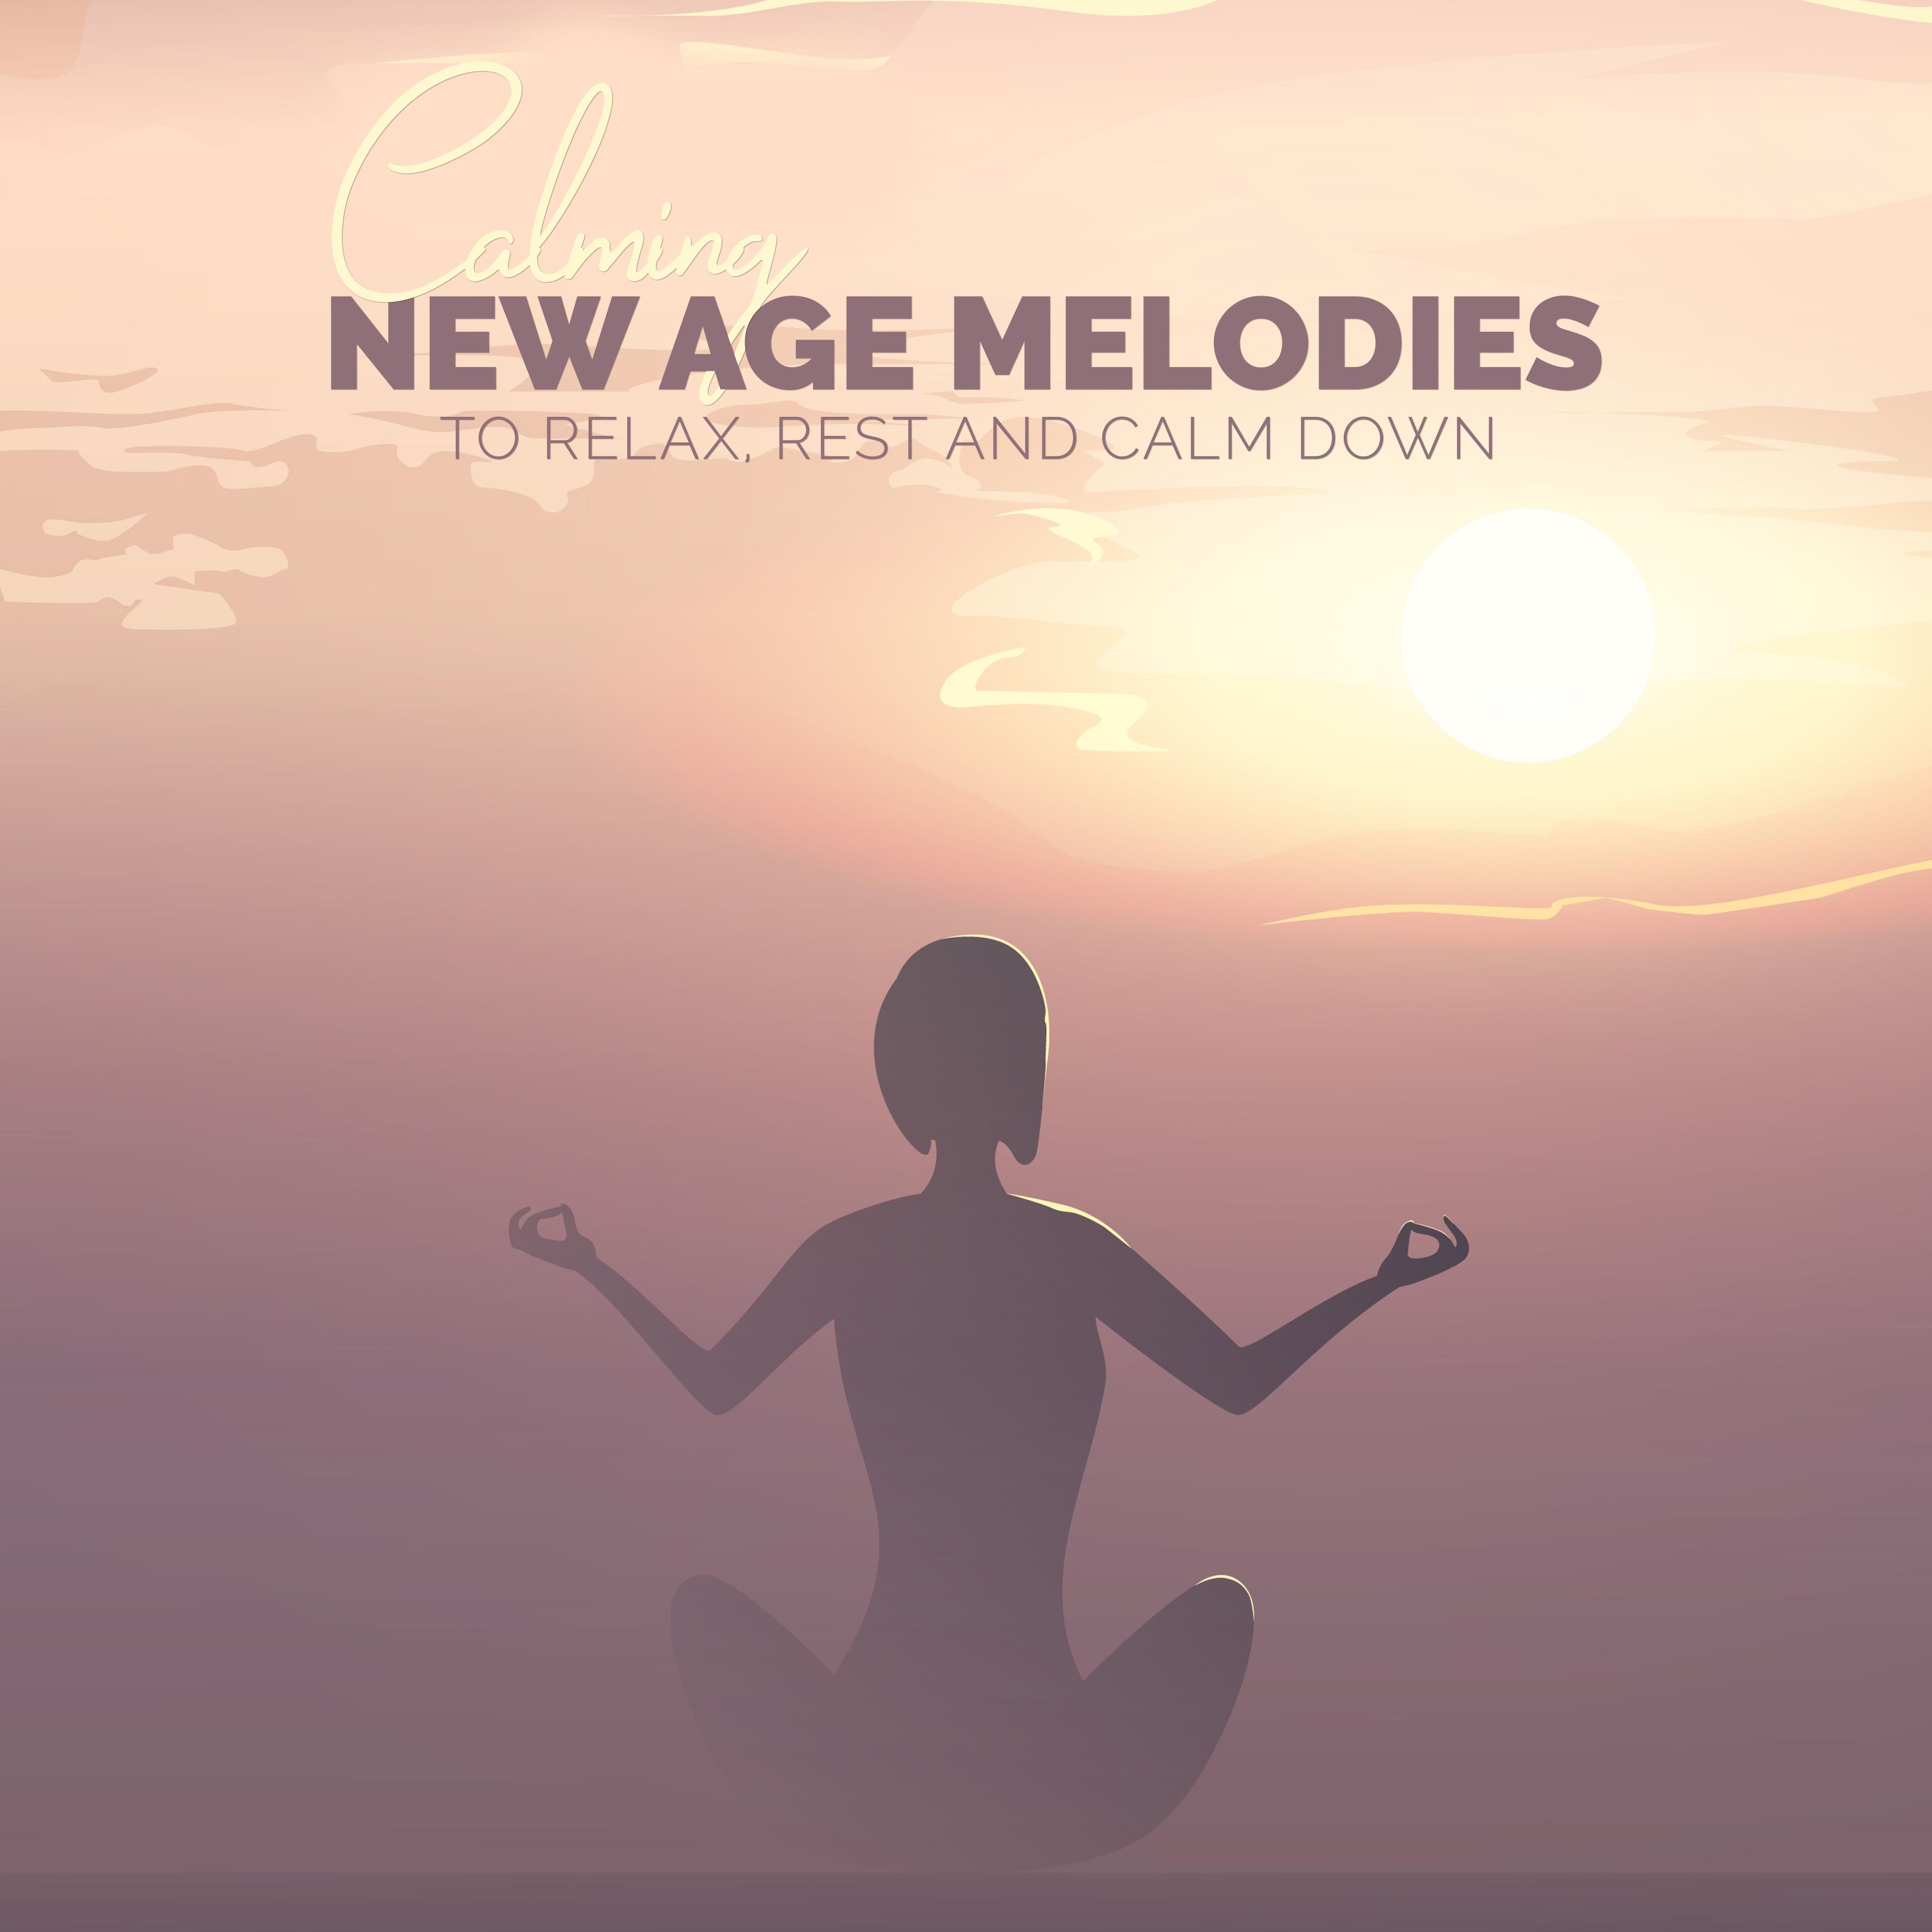 Calming New Age Melodies to Relax, Rest and Calm Down